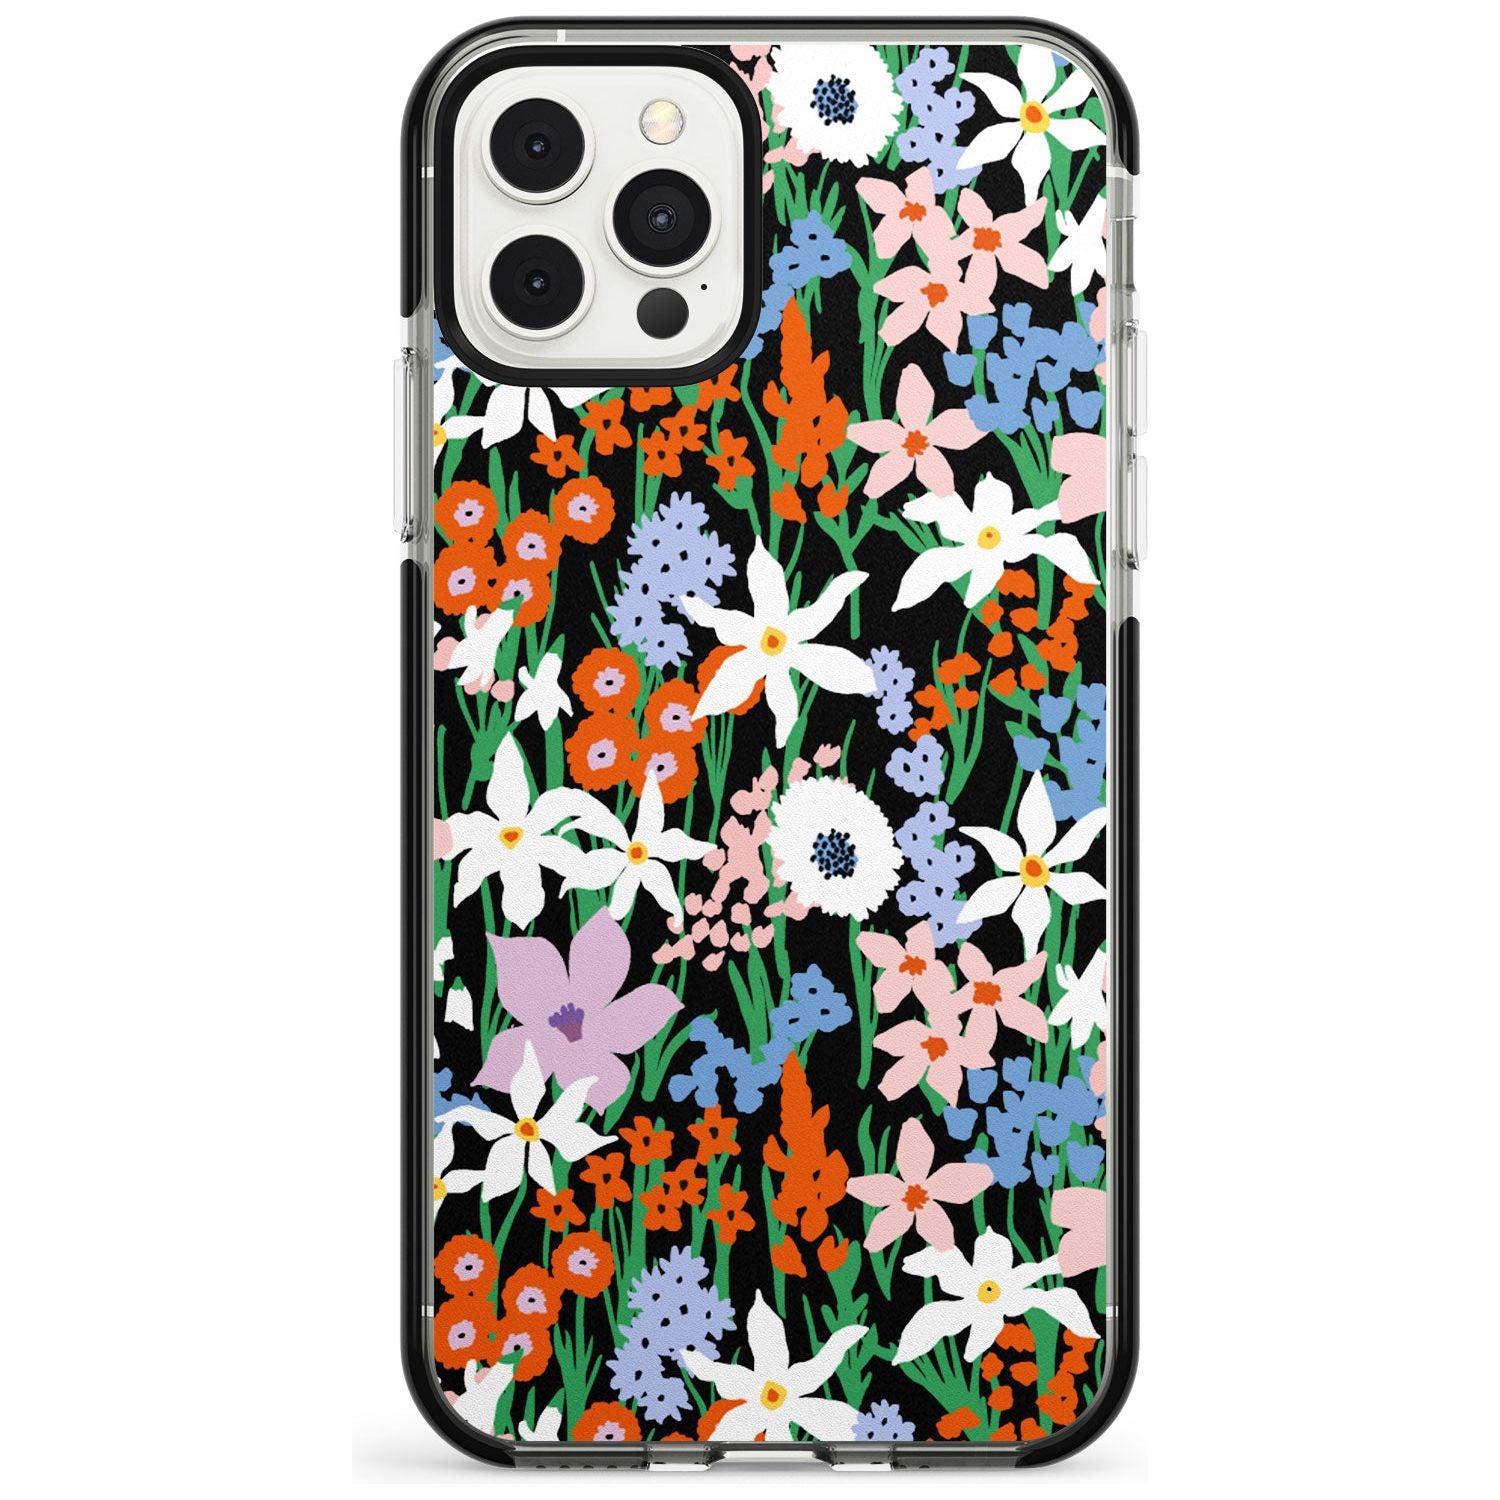 Springtime Meadow: Solid Pink Fade Impact Phone Case for iPhone 11